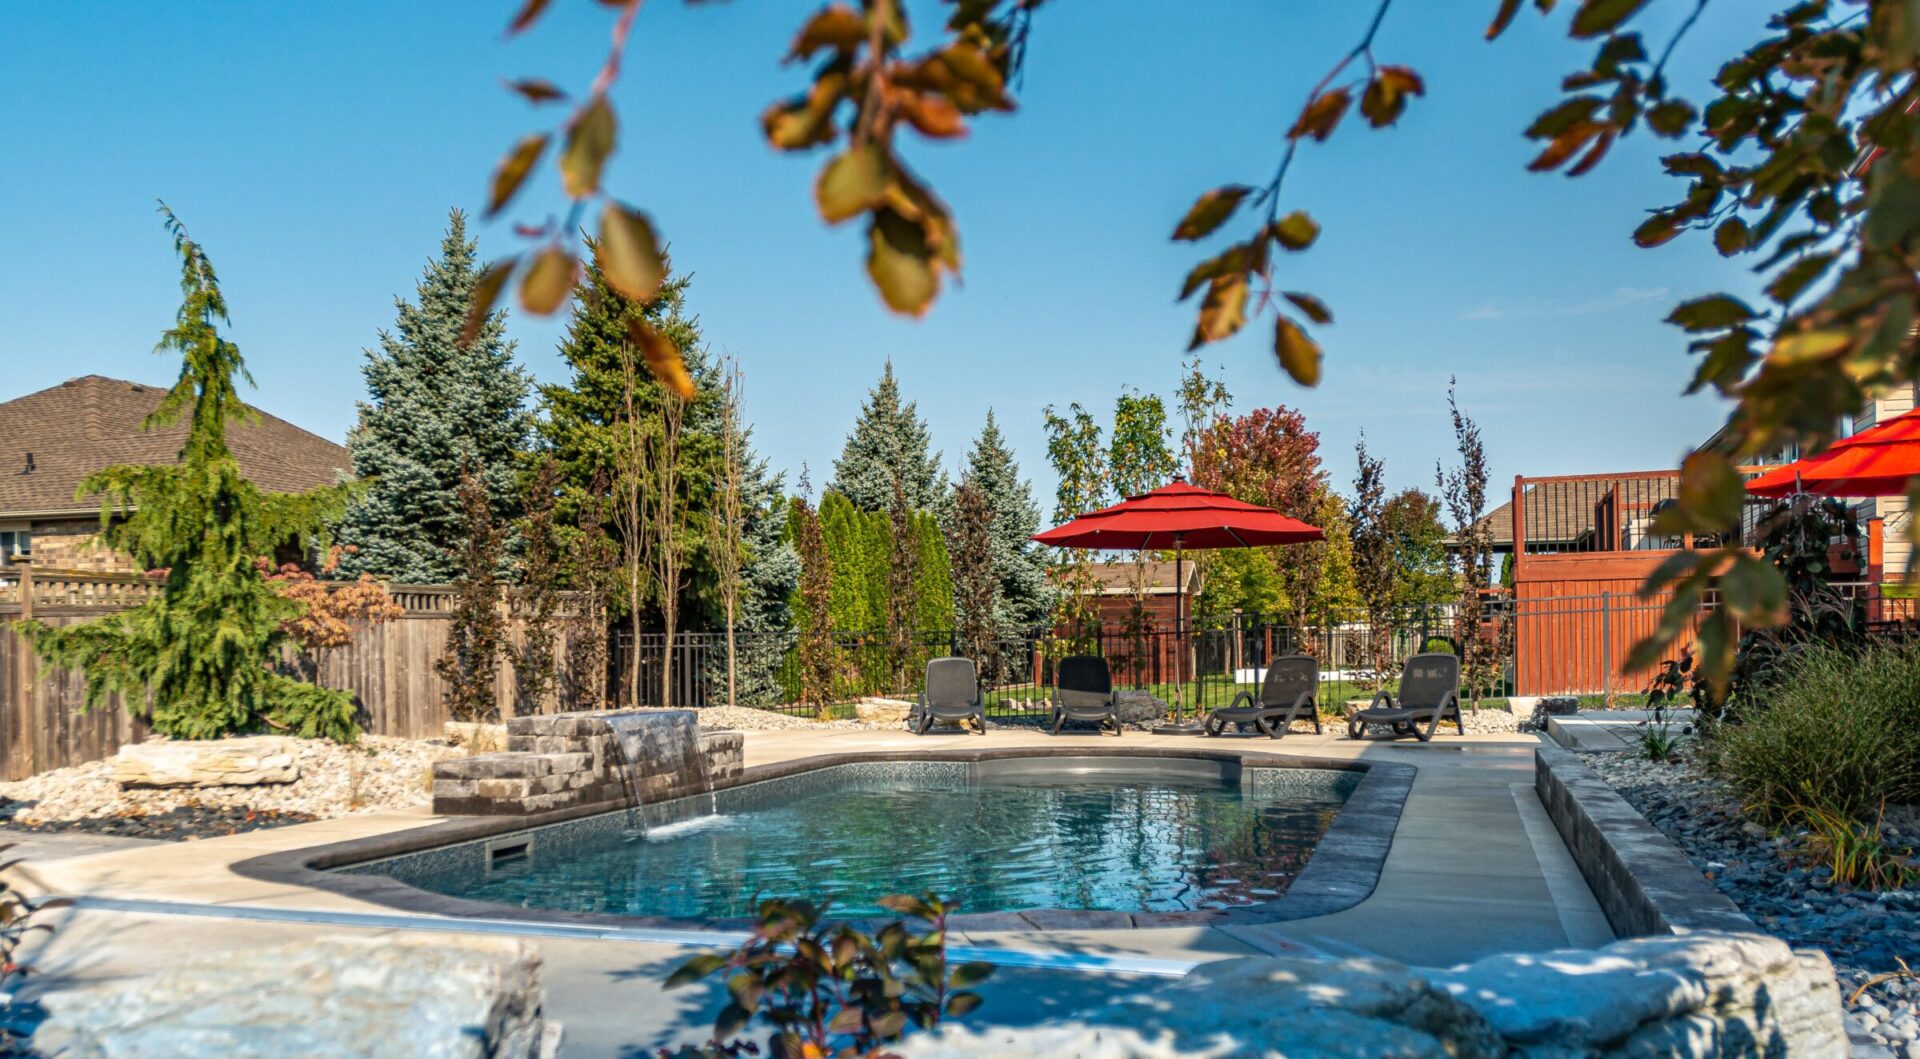 A serene backyard with an inviting swimming pool, surrounded by loungers and red umbrellas, set against a backdrop of trees and a clear blue sky.